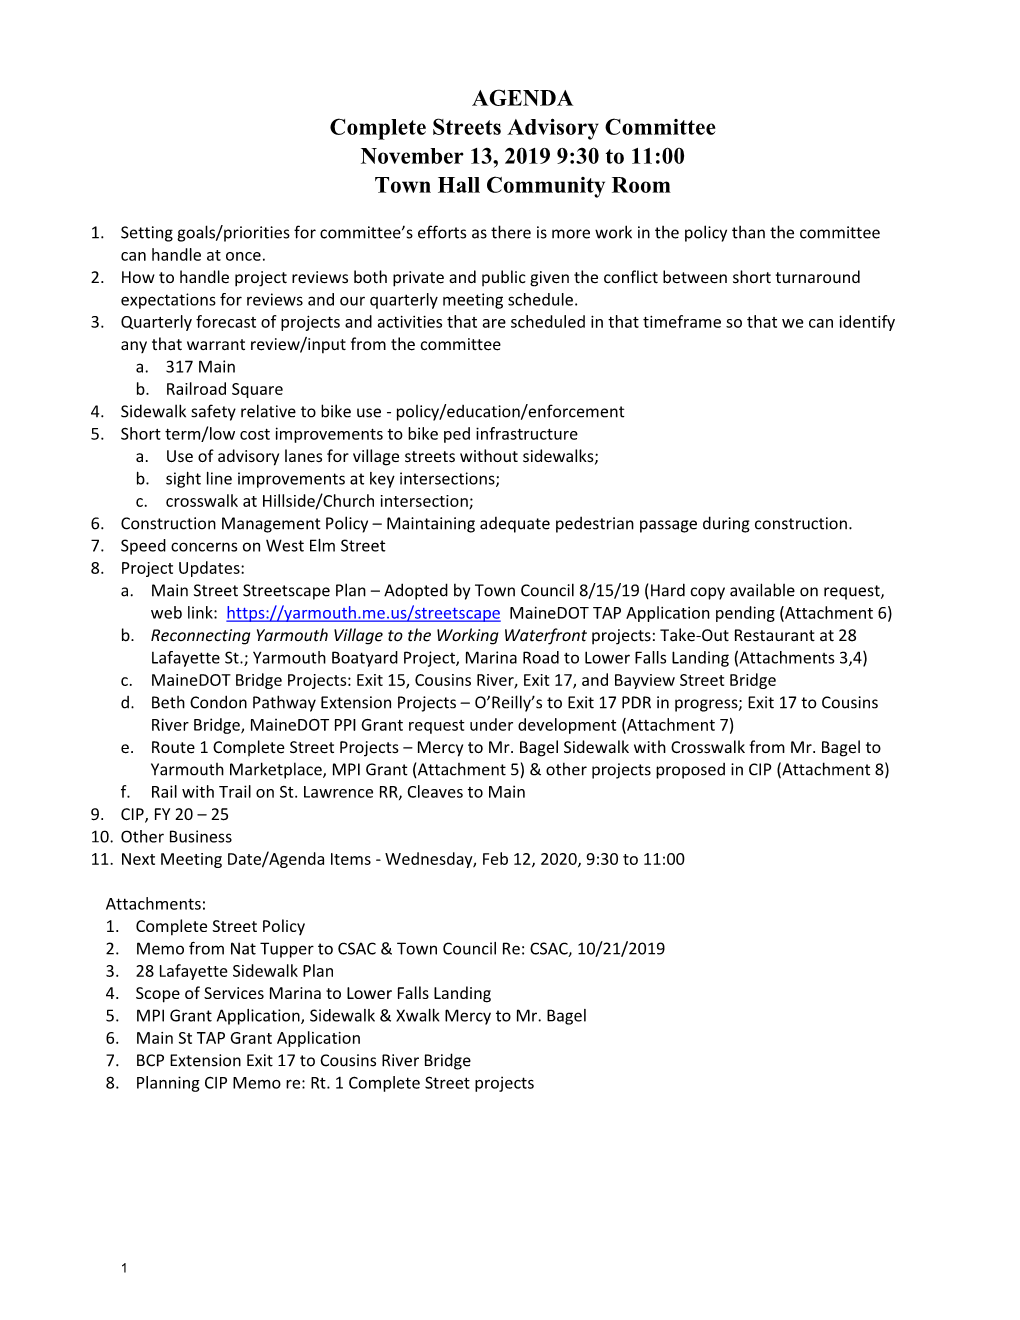 AGENDA Complete Streets Advisory Committee November 13, 2019 9:30 to 11:00 Town Hall Community Room